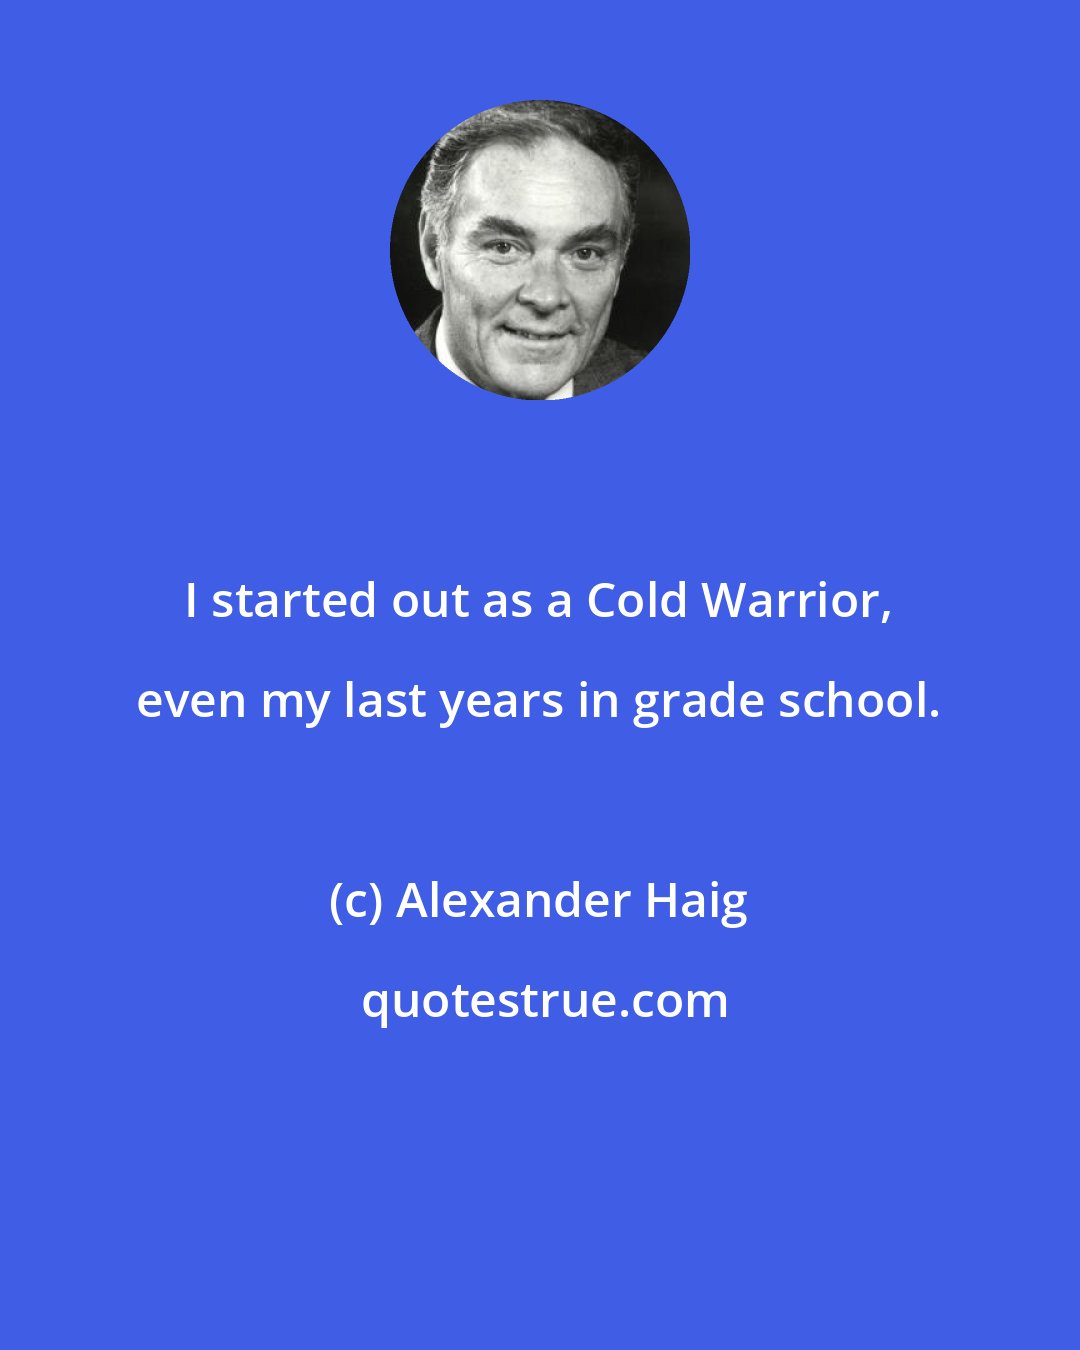 Alexander Haig: I started out as a Cold Warrior, even my last years in grade school.